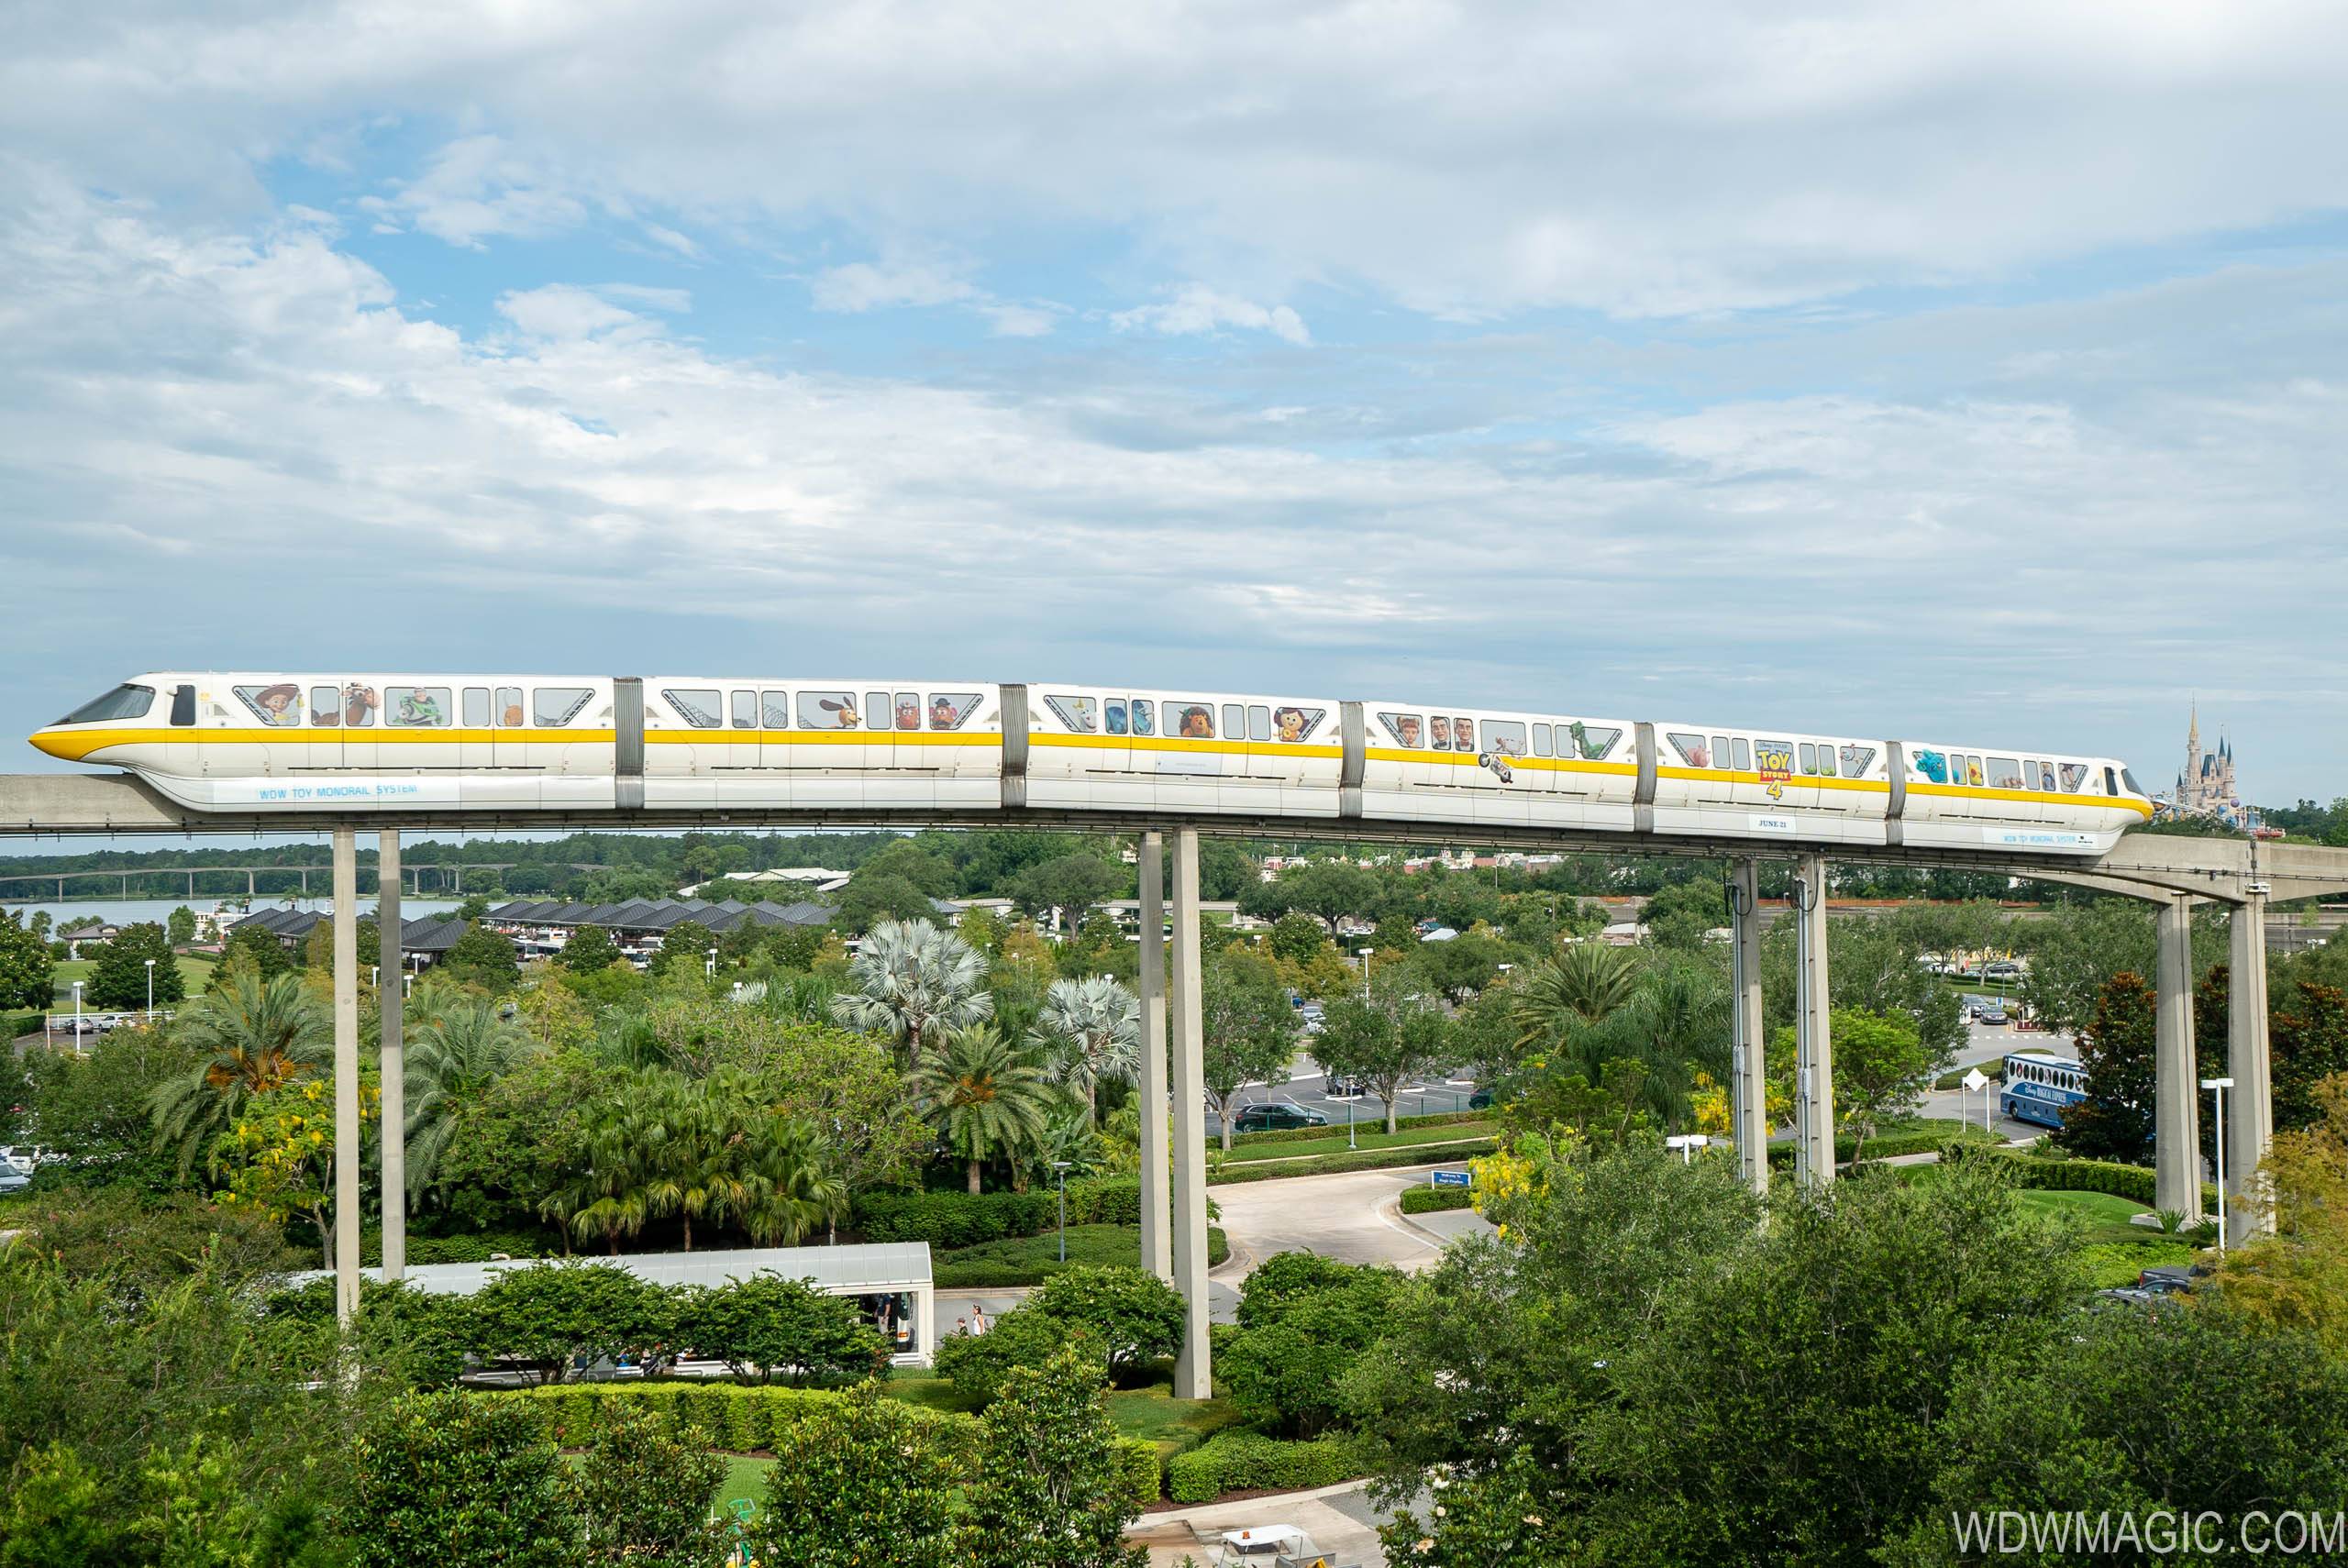 PHOTOS - WDW Toy Monorail System takes to the Express Beam to celebrate Toy Story 4